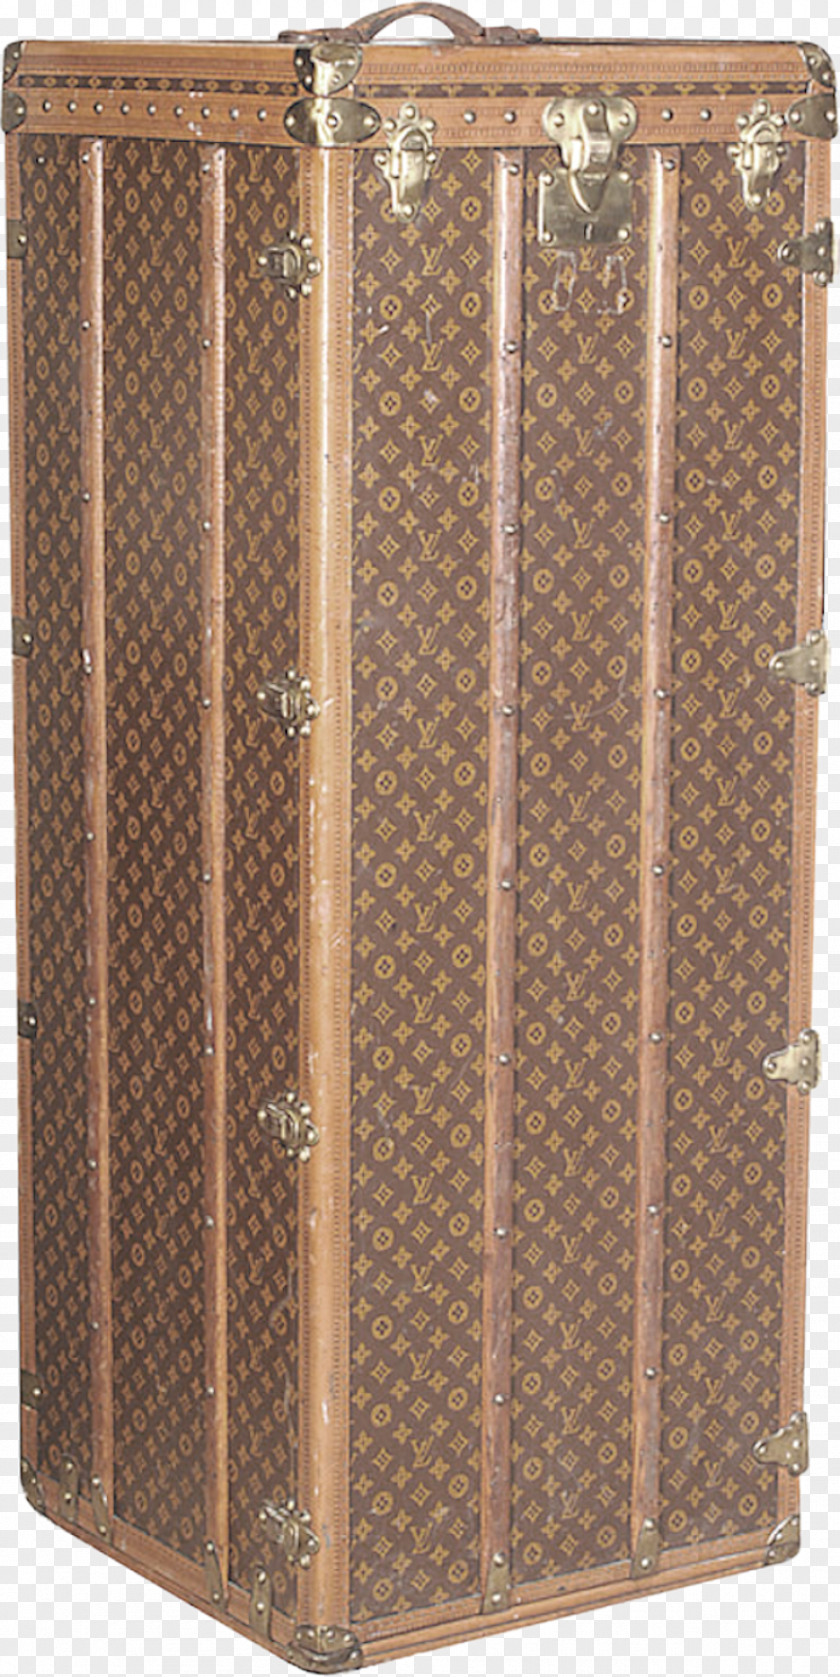 Retro Leather Box Free Download Trunk Suitcase Louis Vuitton PNG